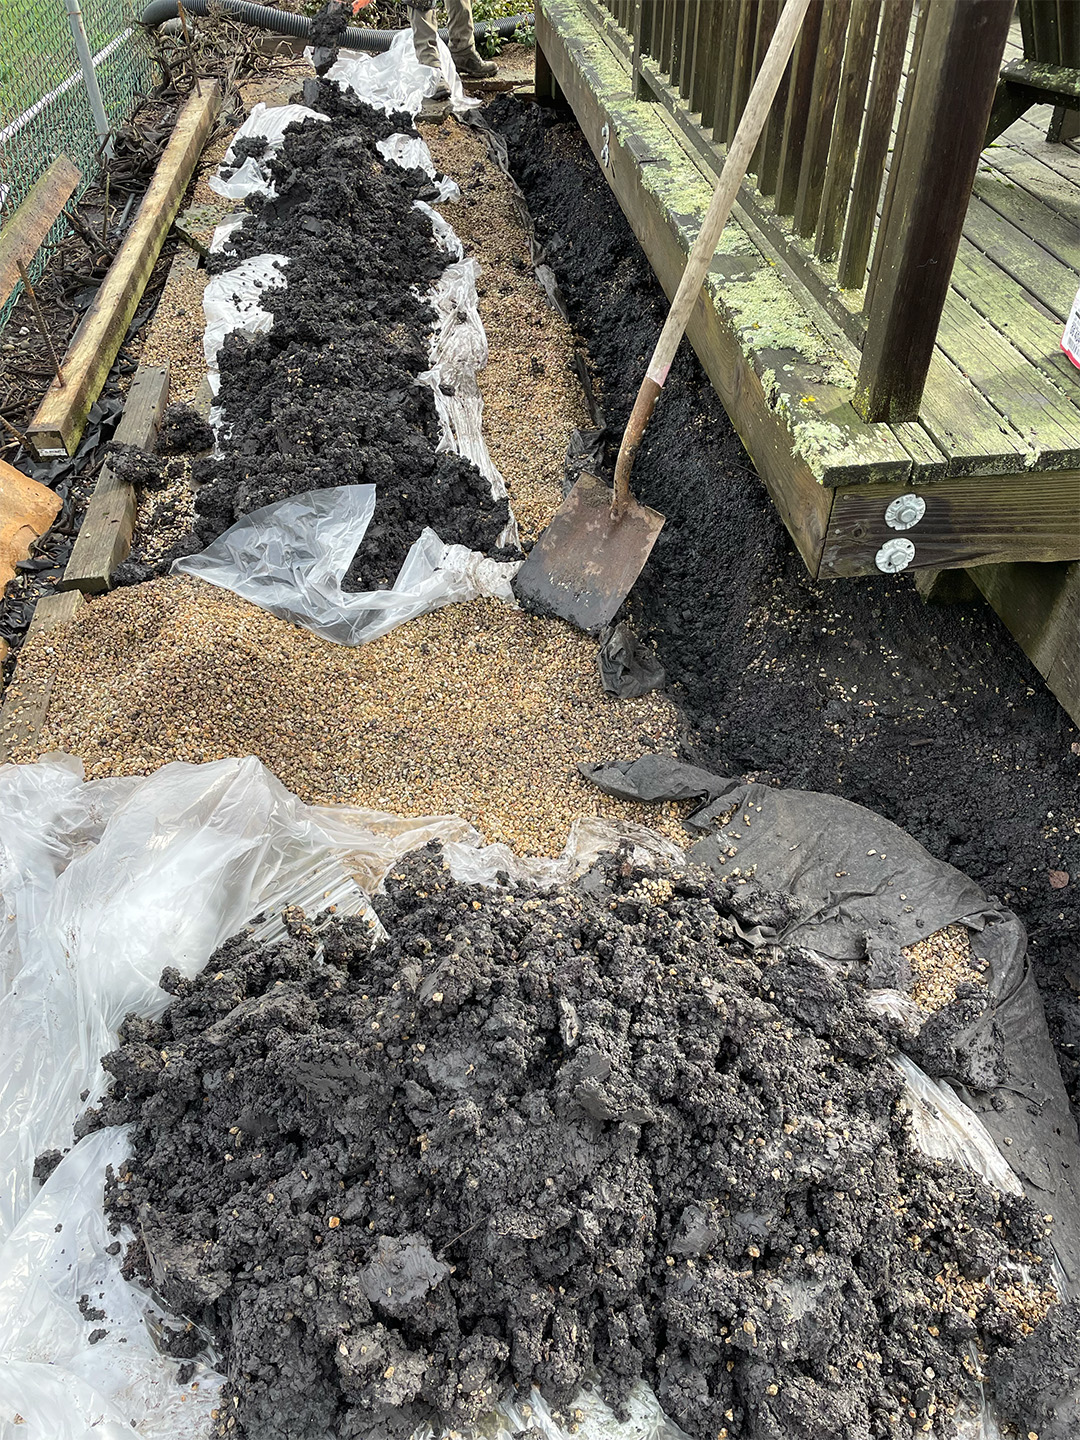 Trenching dug around our client's deck to Get Rid of Skunks and Raccoons